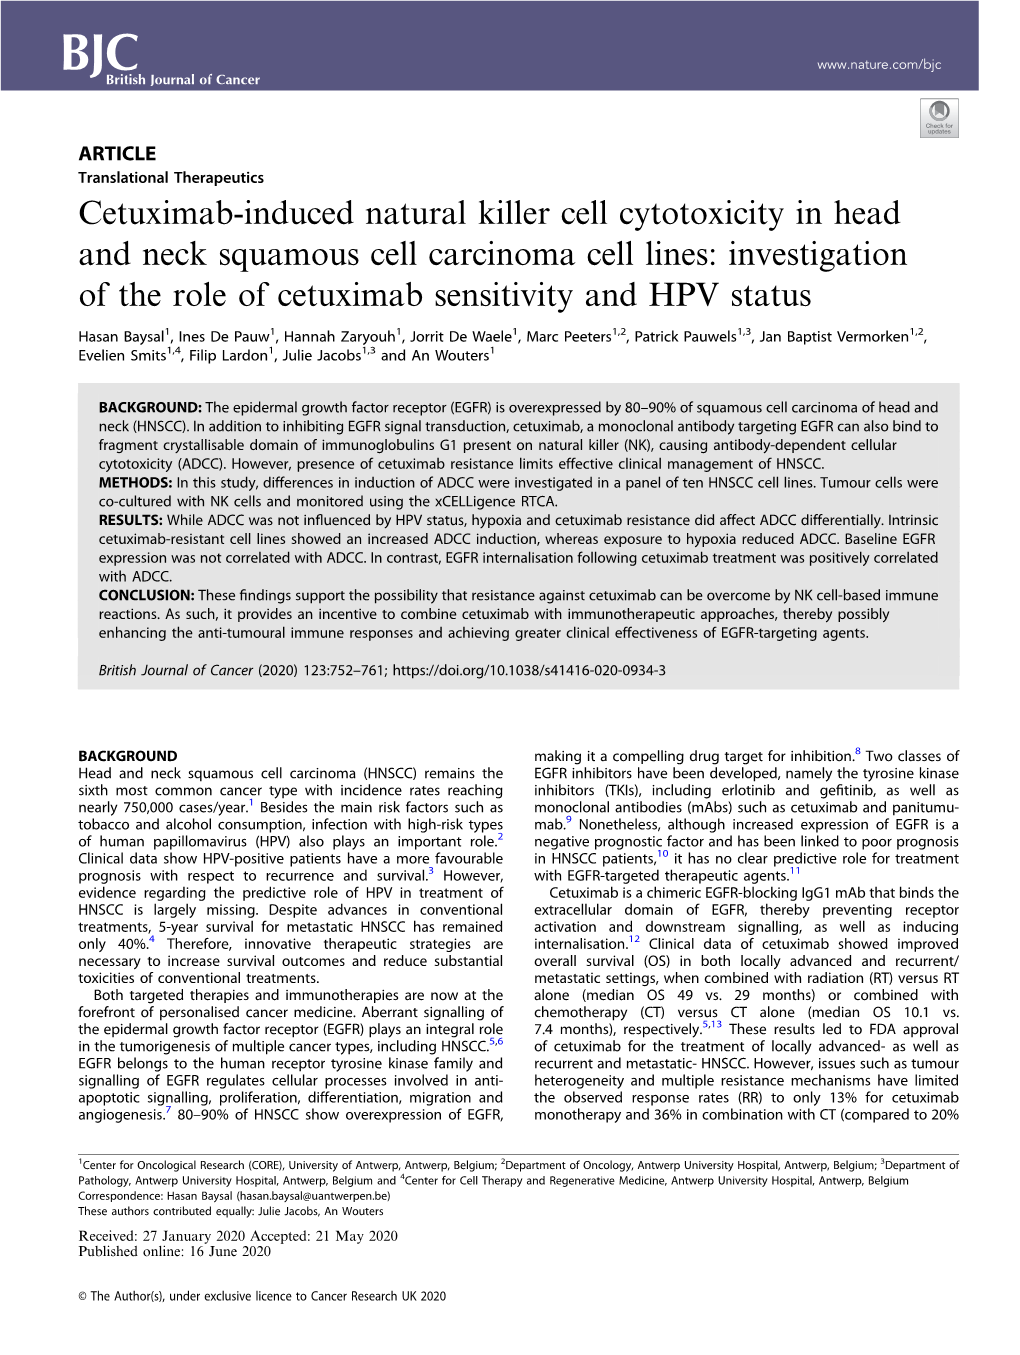 Cetuximab-Induced Natural Killer Cell Cytotoxicity in Head and Neck